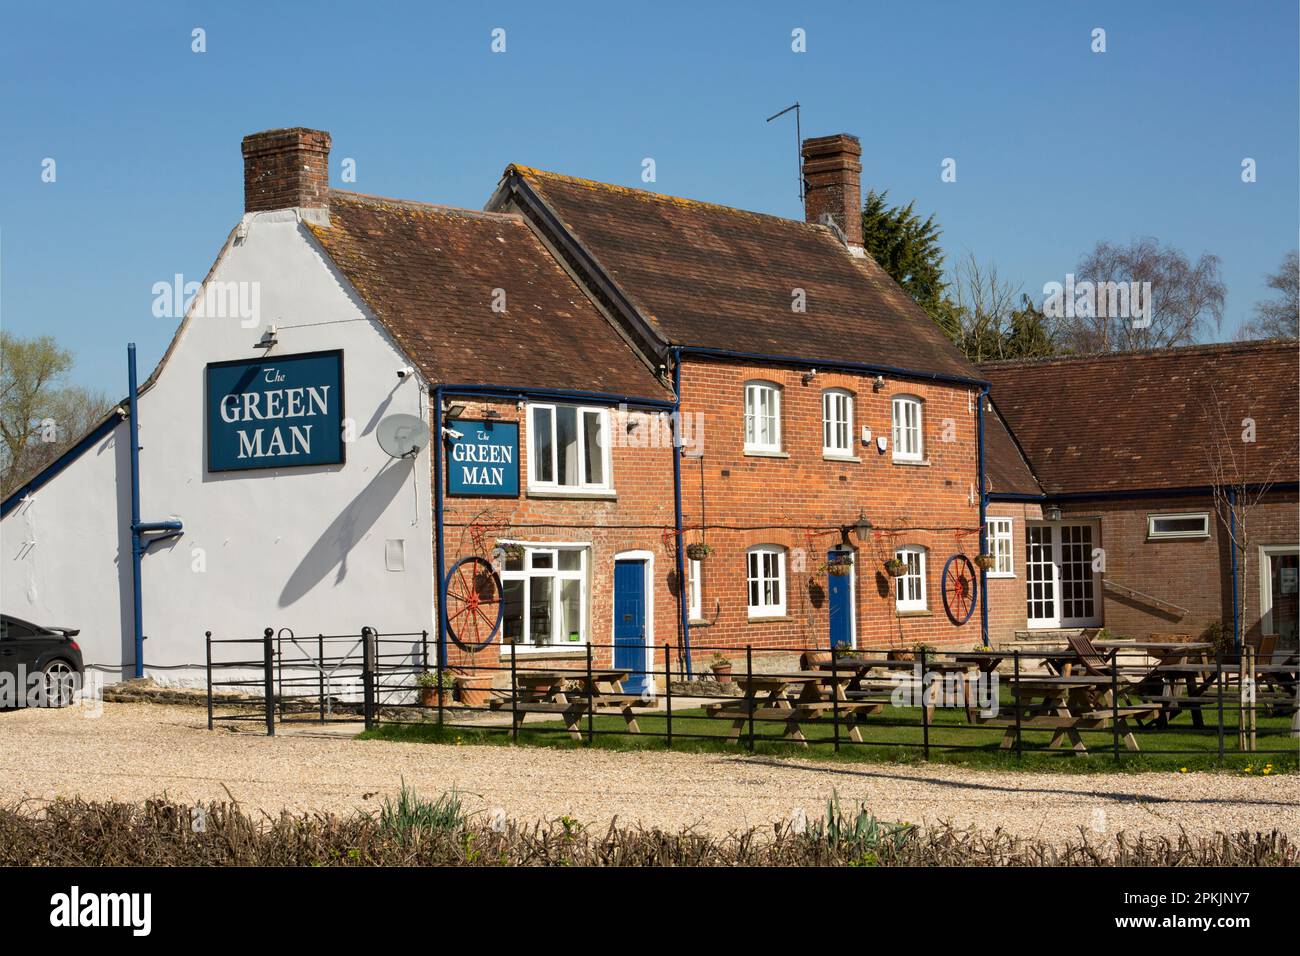 The Green Man pub at King's Stag Dorset England GB Banque D'Images